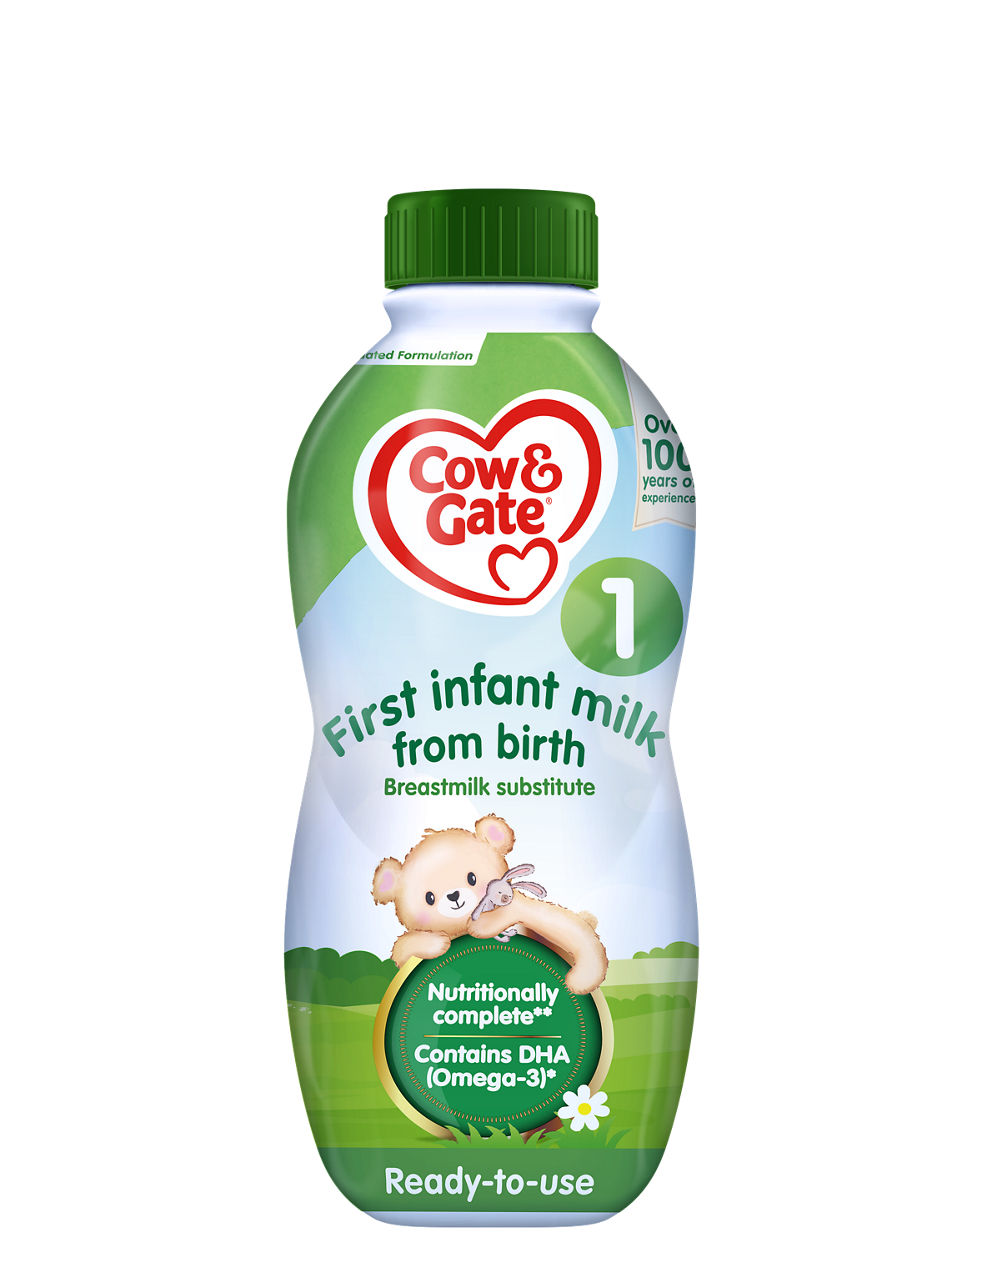 Cow & Gate Stage 1 First Infant Milk Ready To Use 1L 		